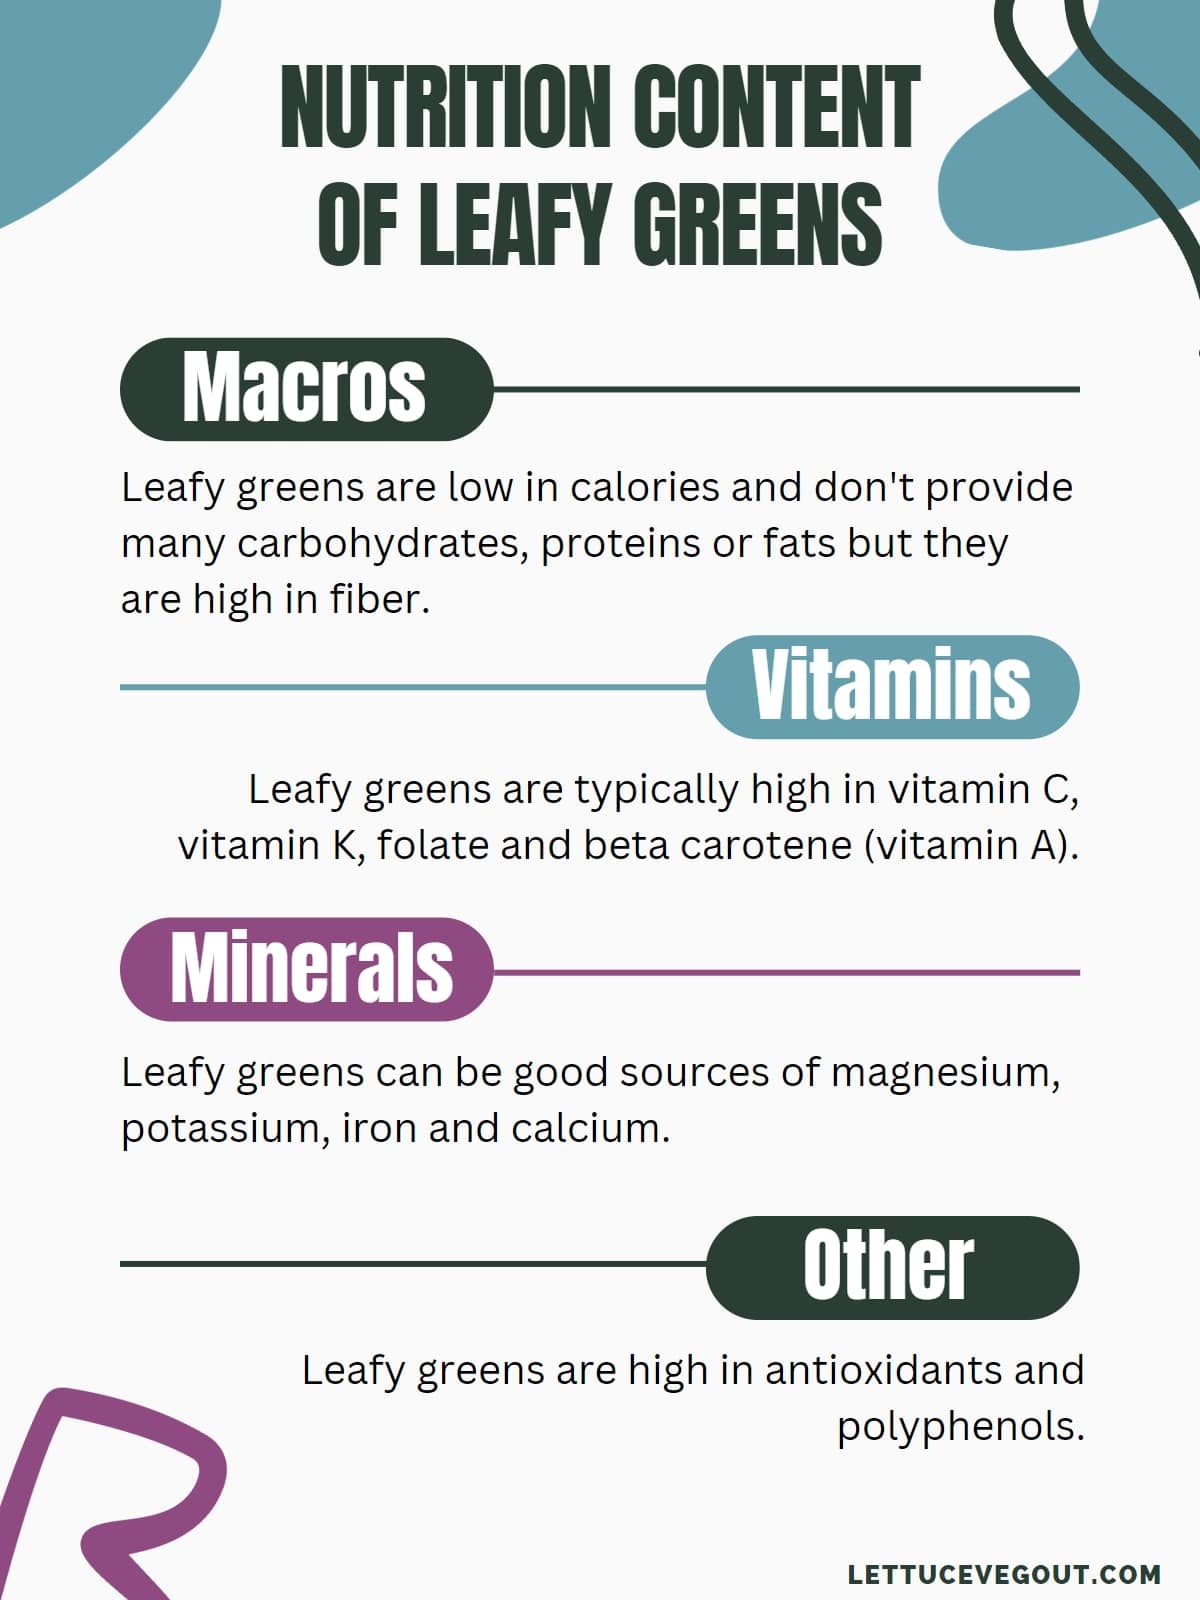 Infographic with the general nutrition content of leafy greens (macros, vitamins, minerals, other).